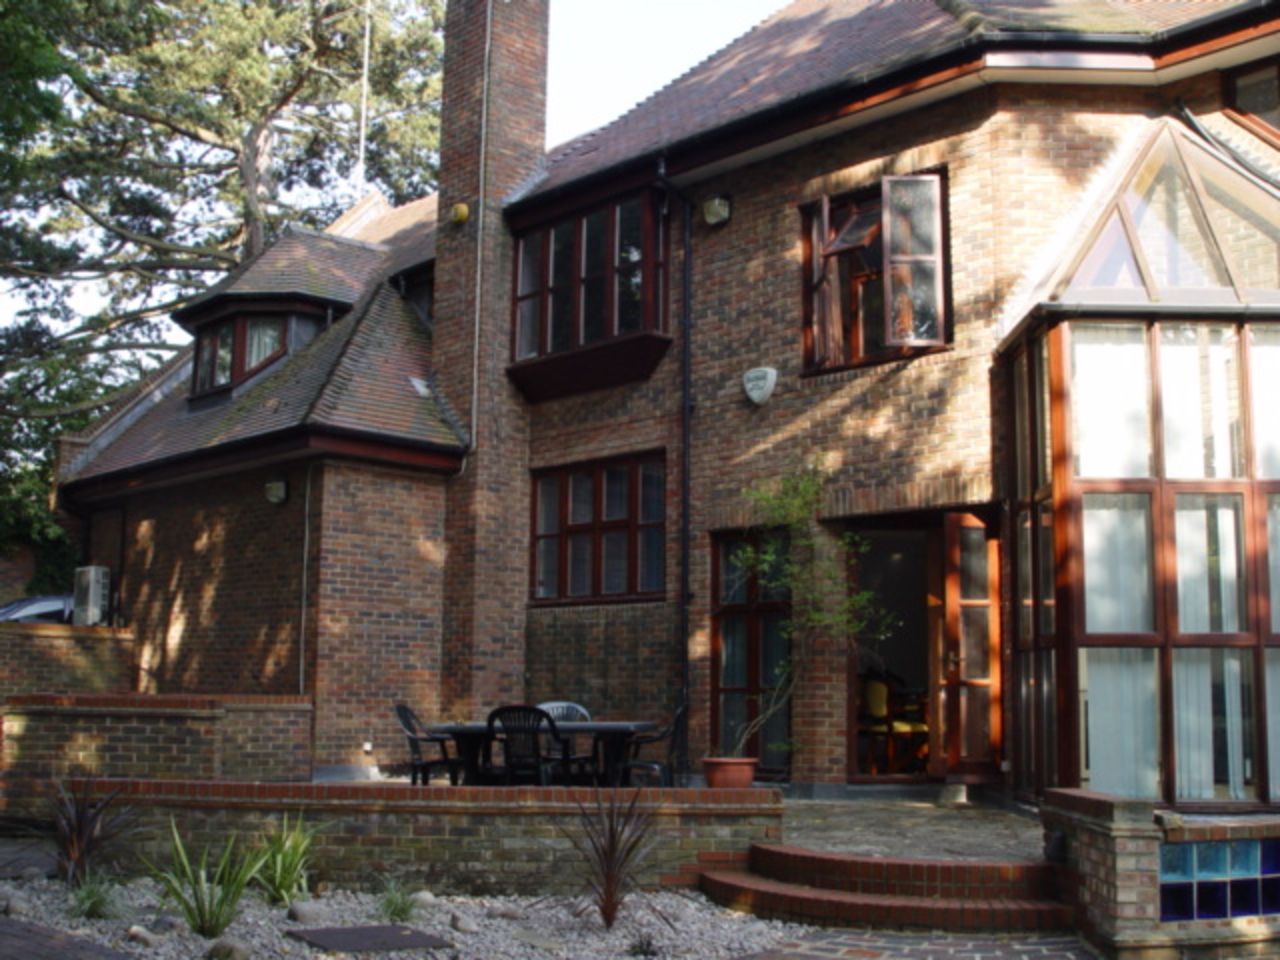 Ibori paid for this $3.5 milion Hampstead home in cash, and bought properties in Dorset, south west England and South Africa.